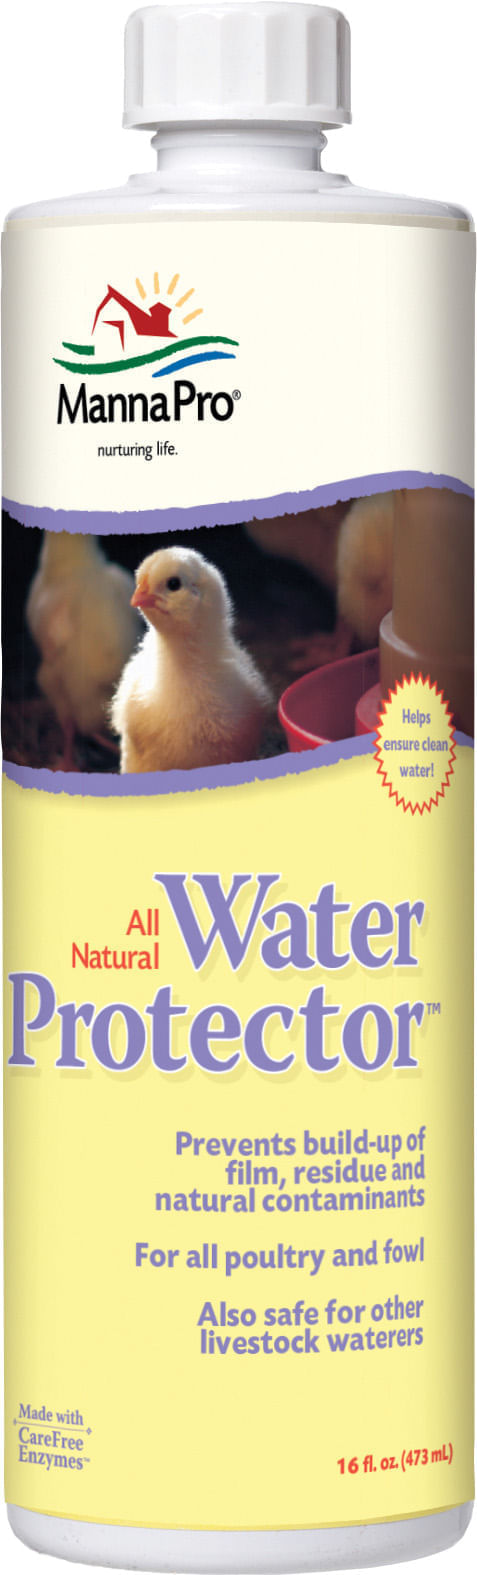 Water-Protector-16-oz-